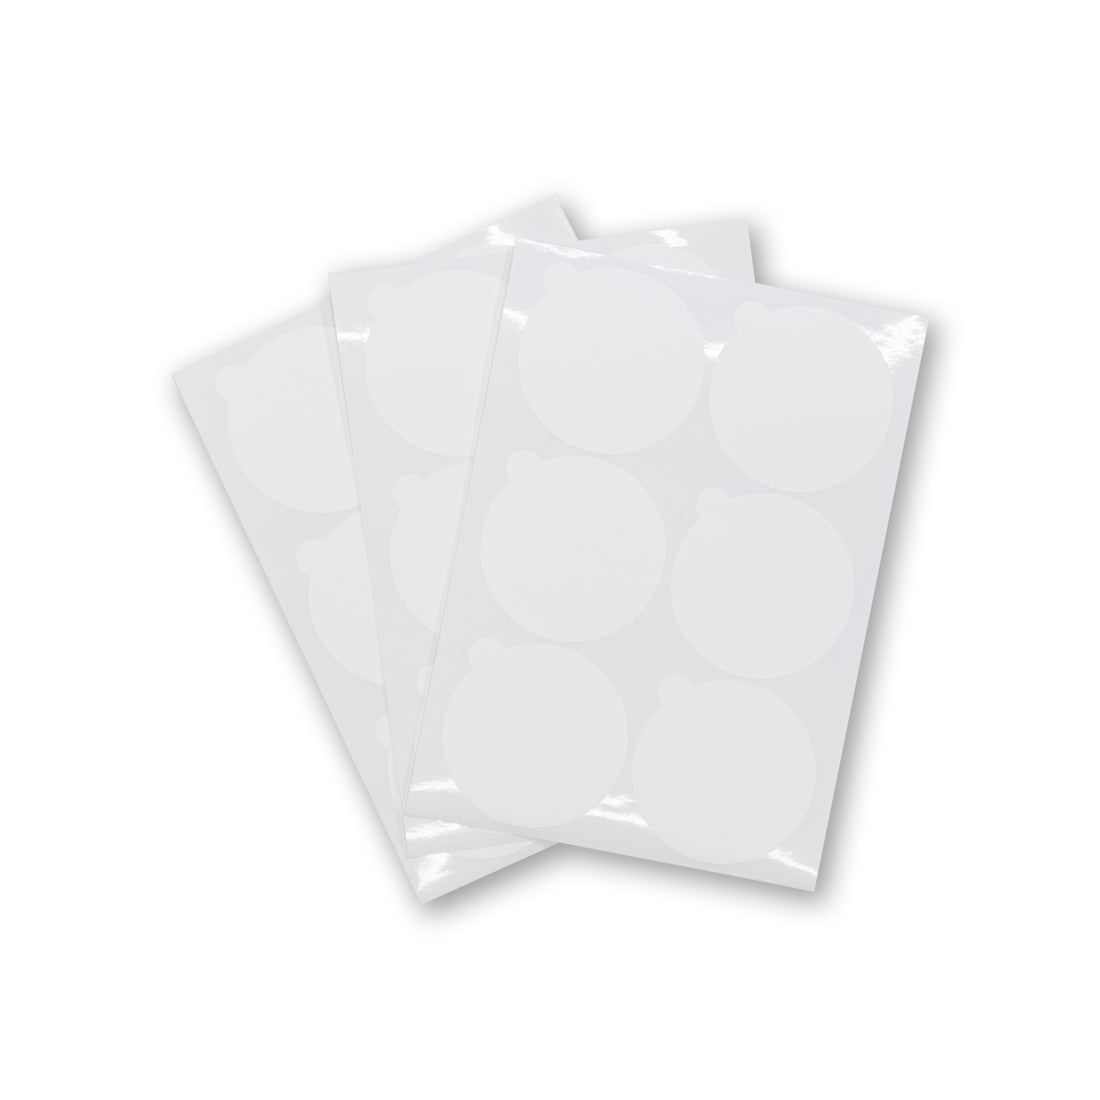 Sticker Covers- Disposable, Large and Small